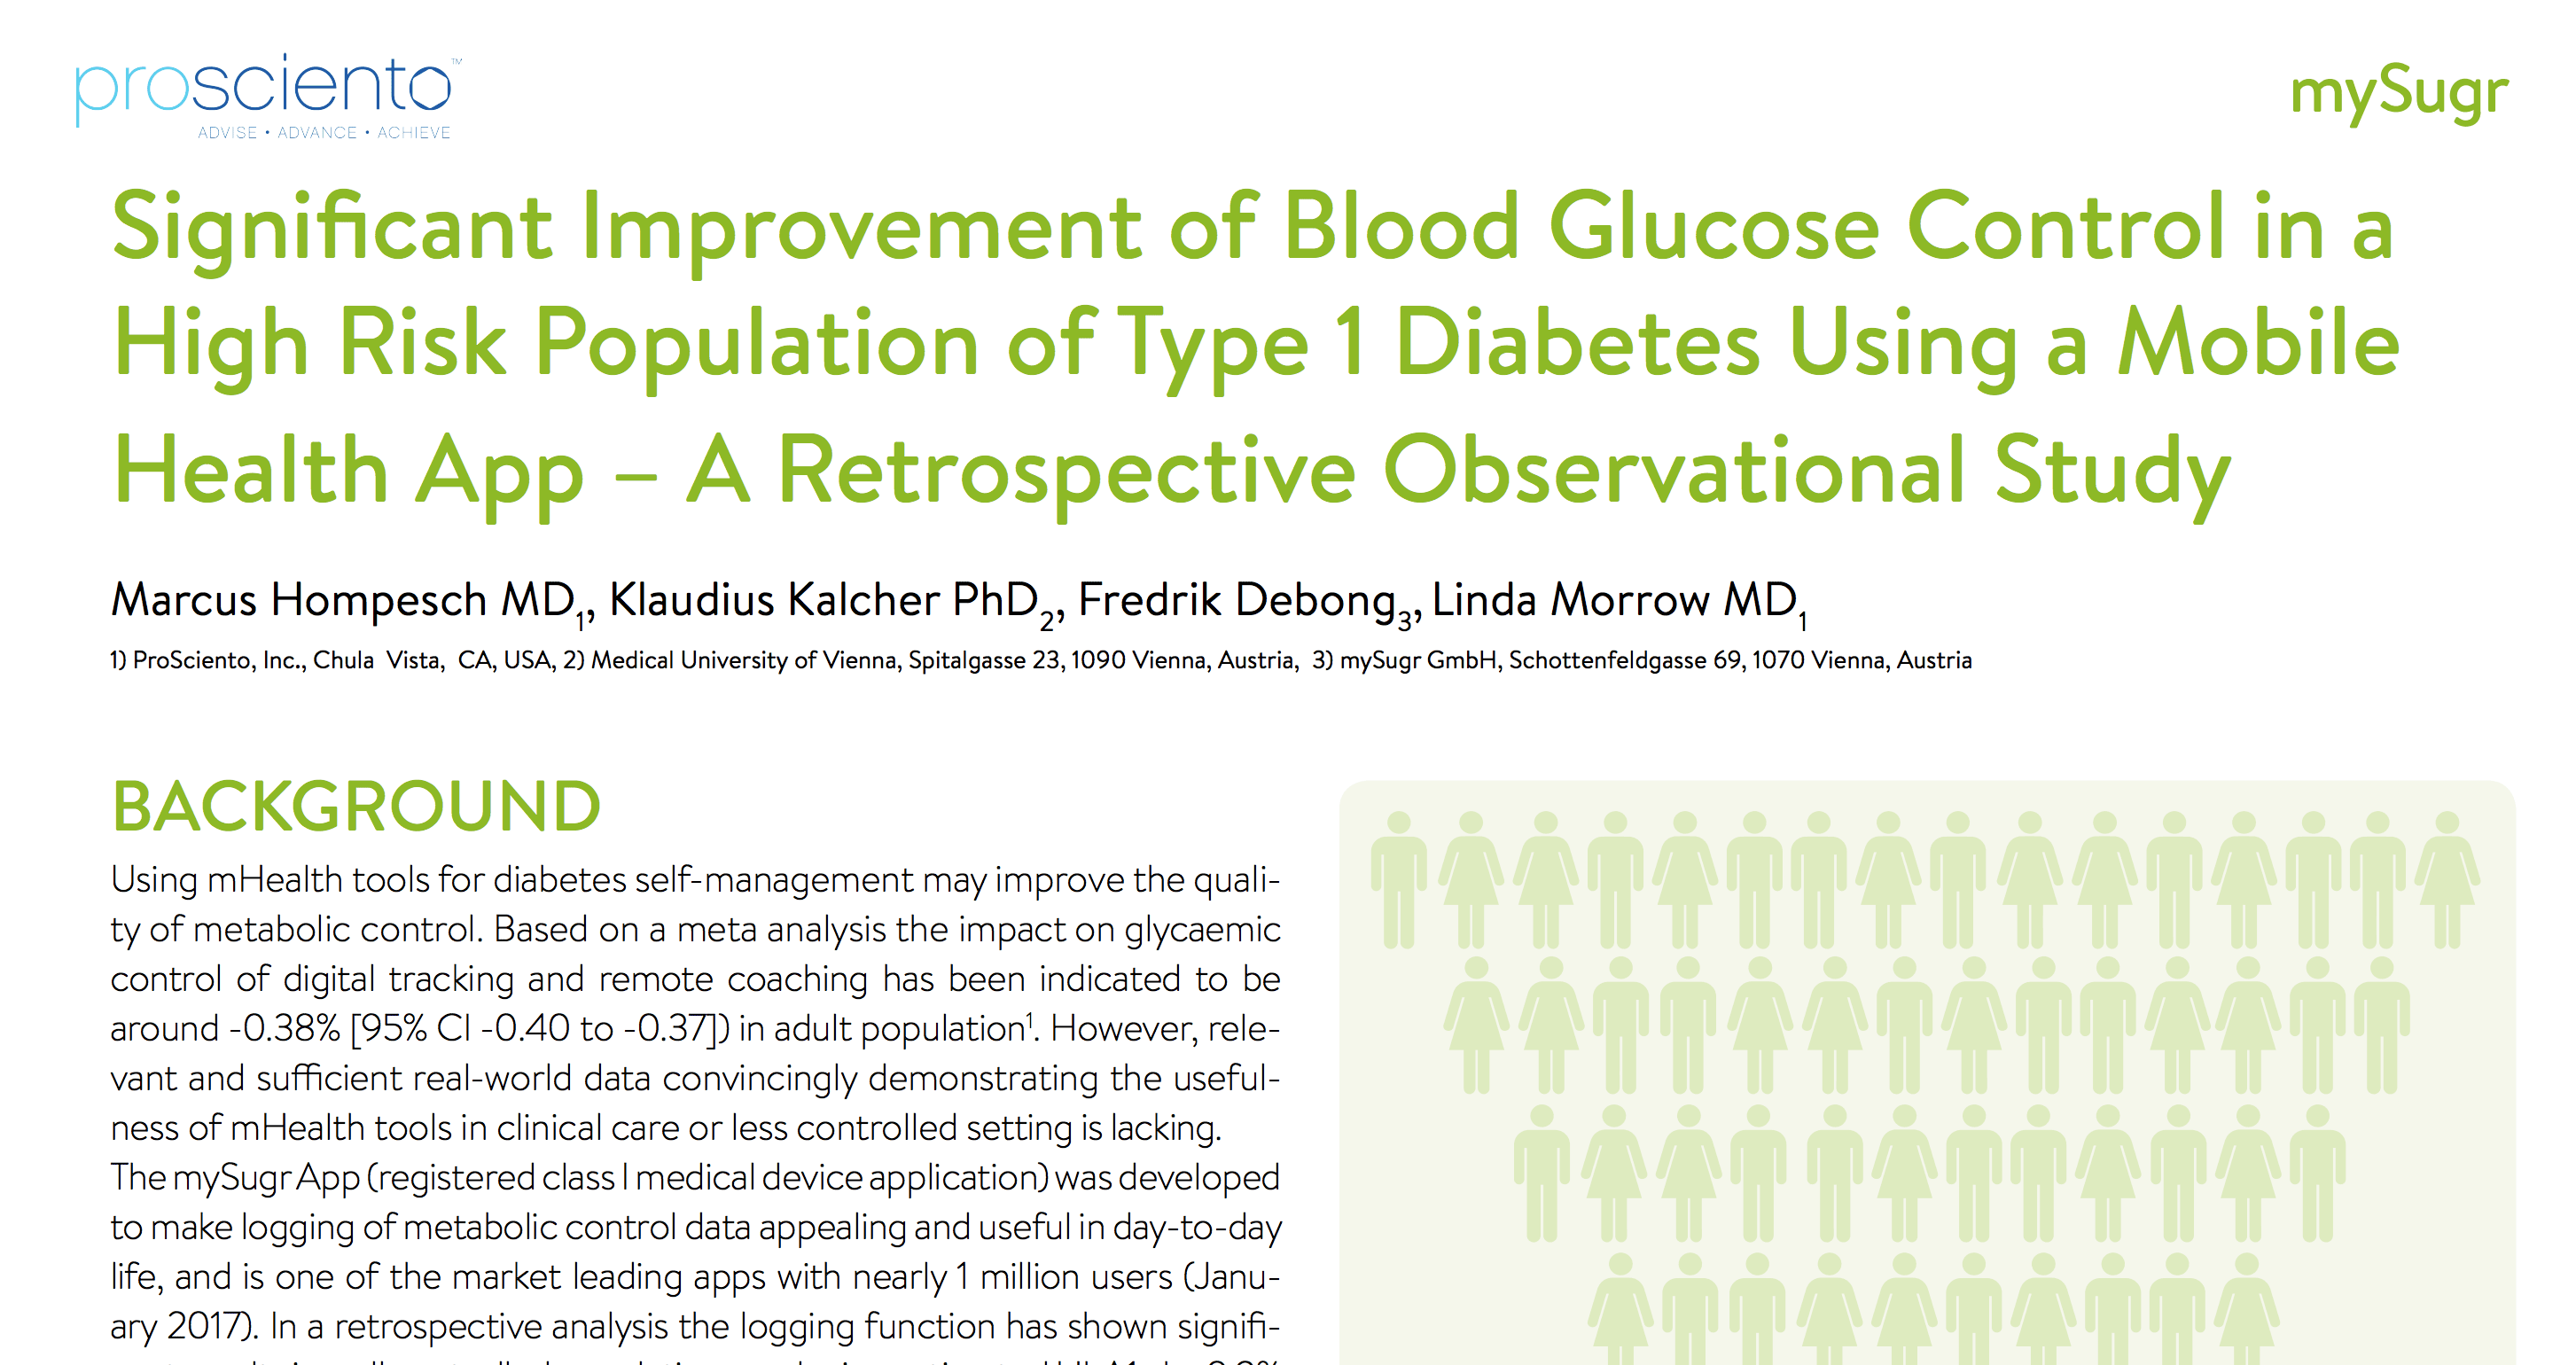 Significant improvement of blood glucose control in a high-risk population of type 1 diabetes using a mobile health app – a retrospective observational study. thumbnail